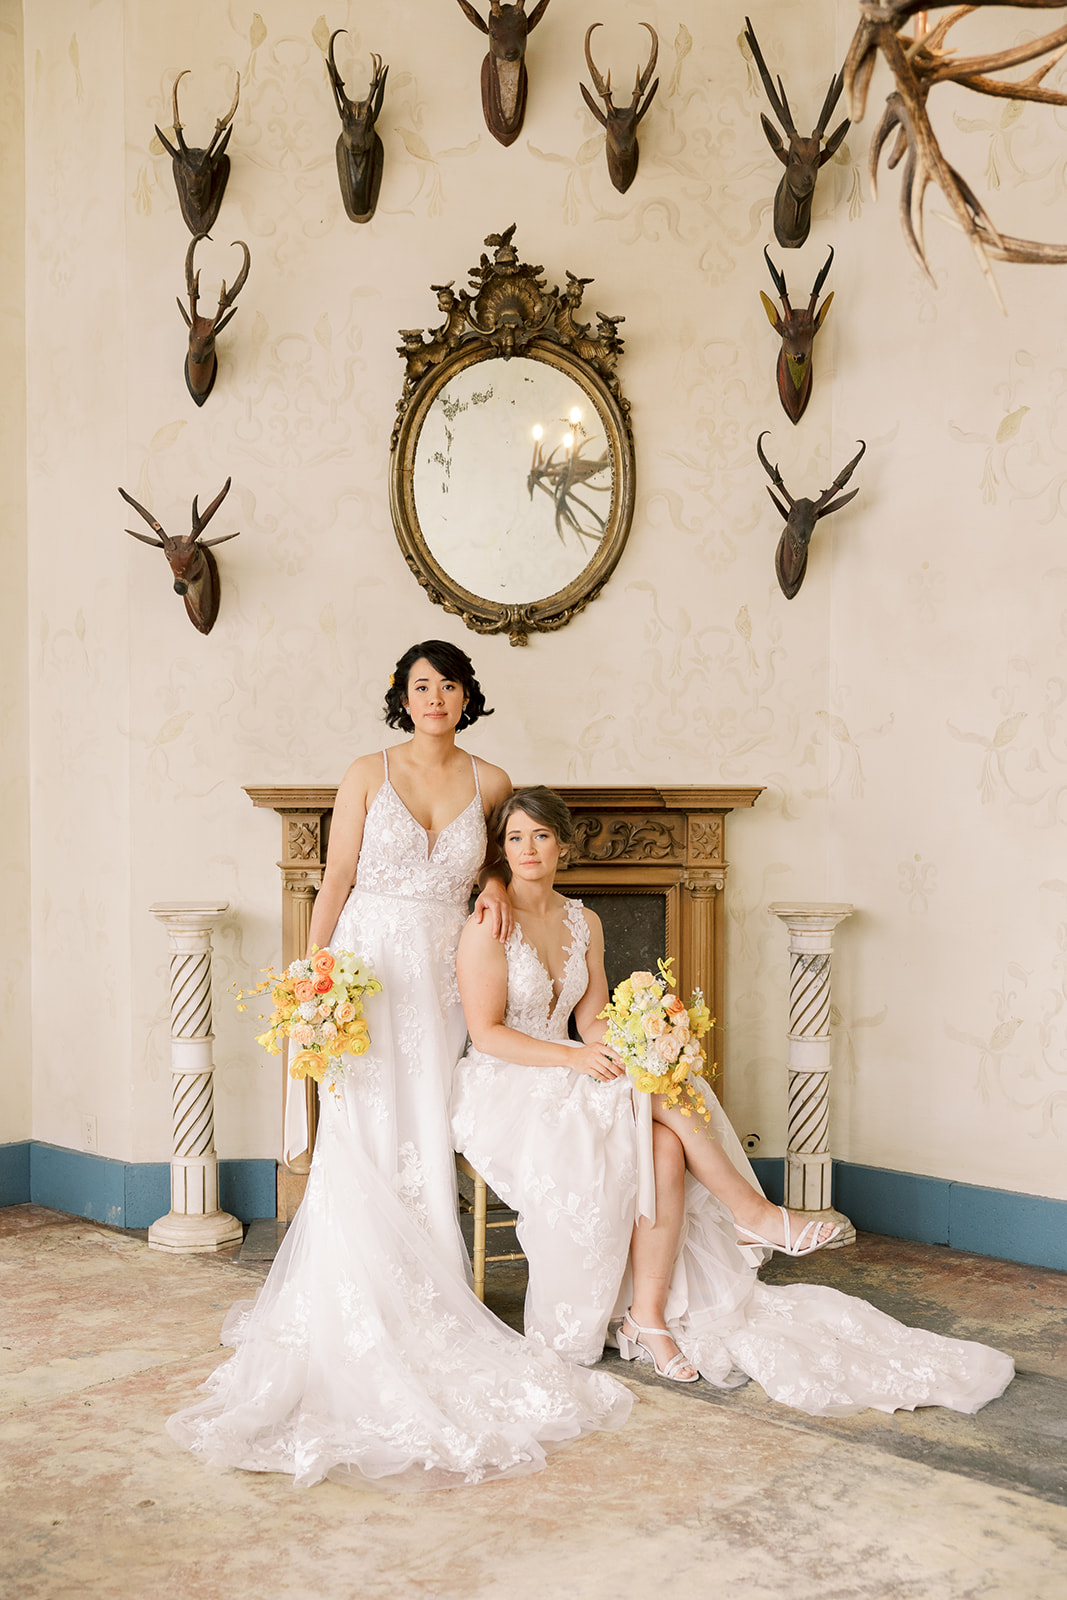 one bride stands next to a chair with another bride sitting